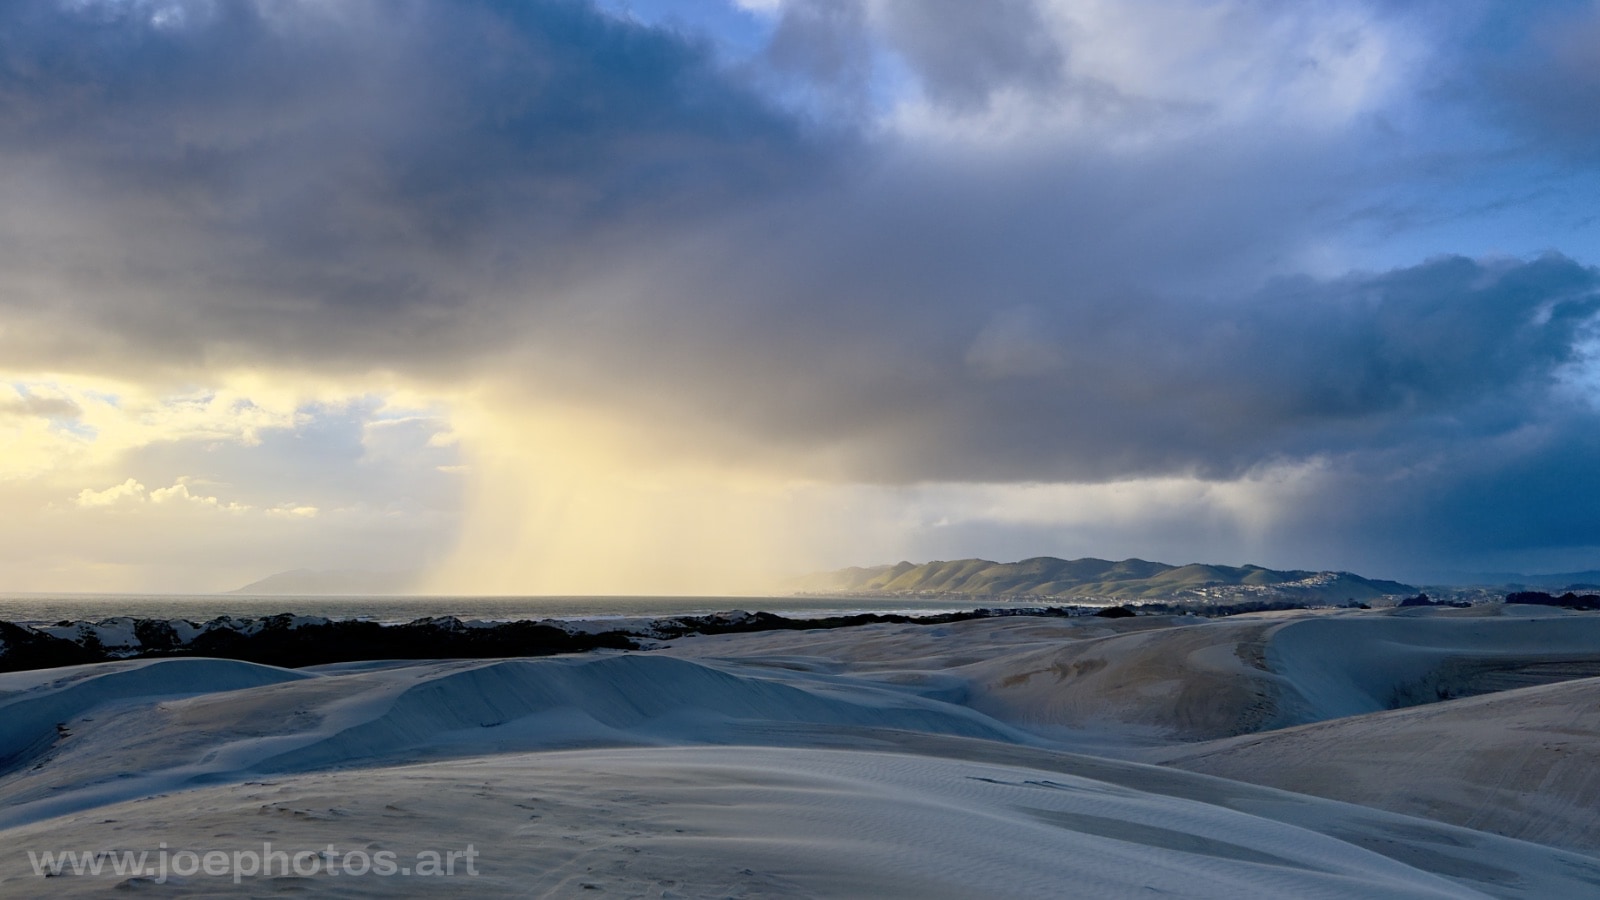 Sand dunes and storm at sunset